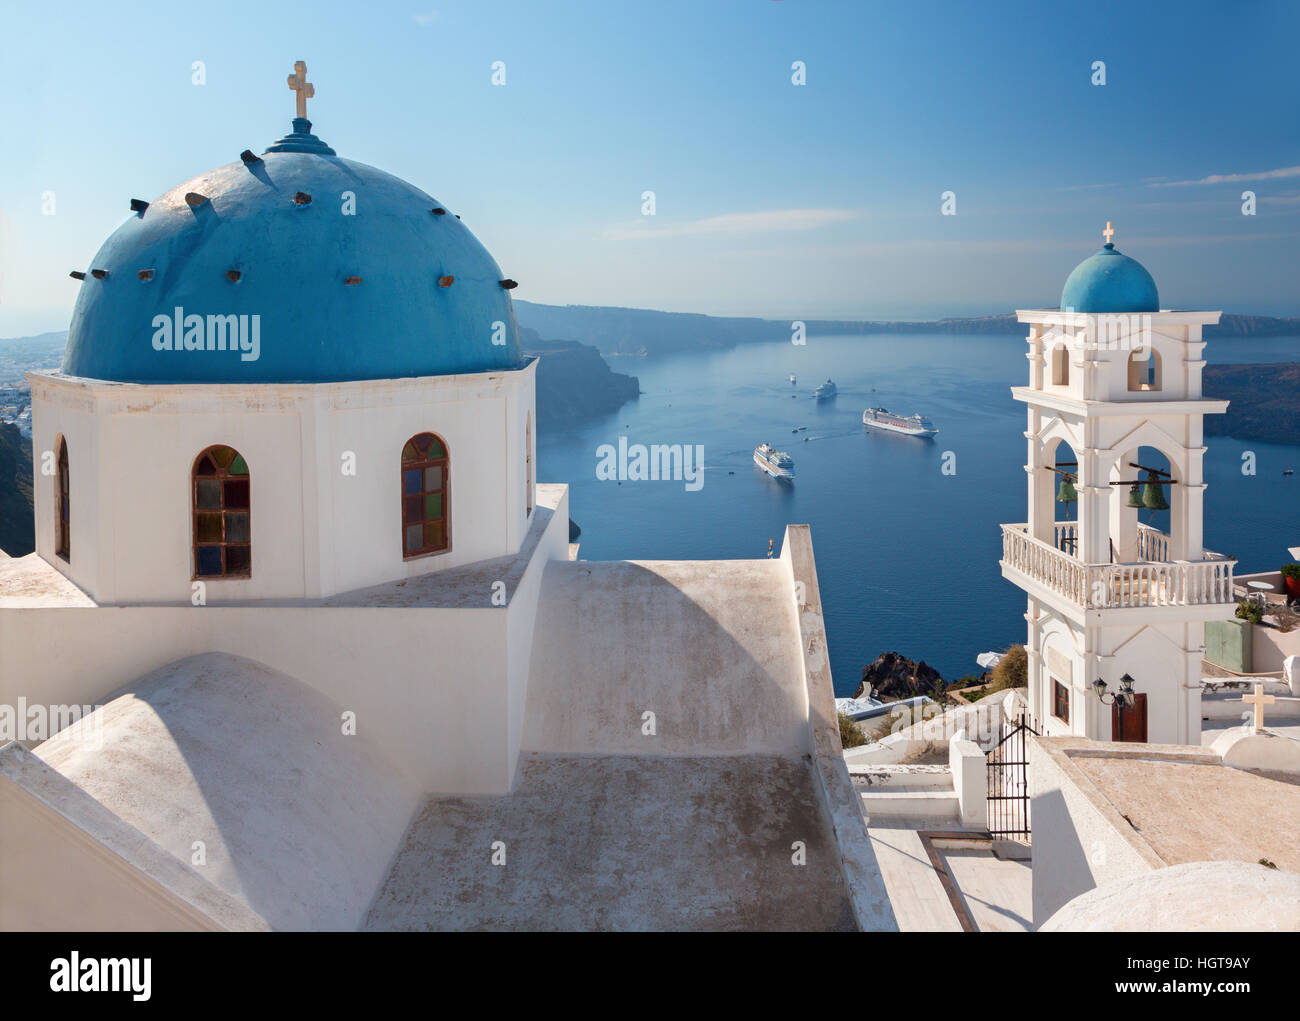 Santorini - The tower of Anastasi church in Imerovigli with the cruises in background. Stock Photo